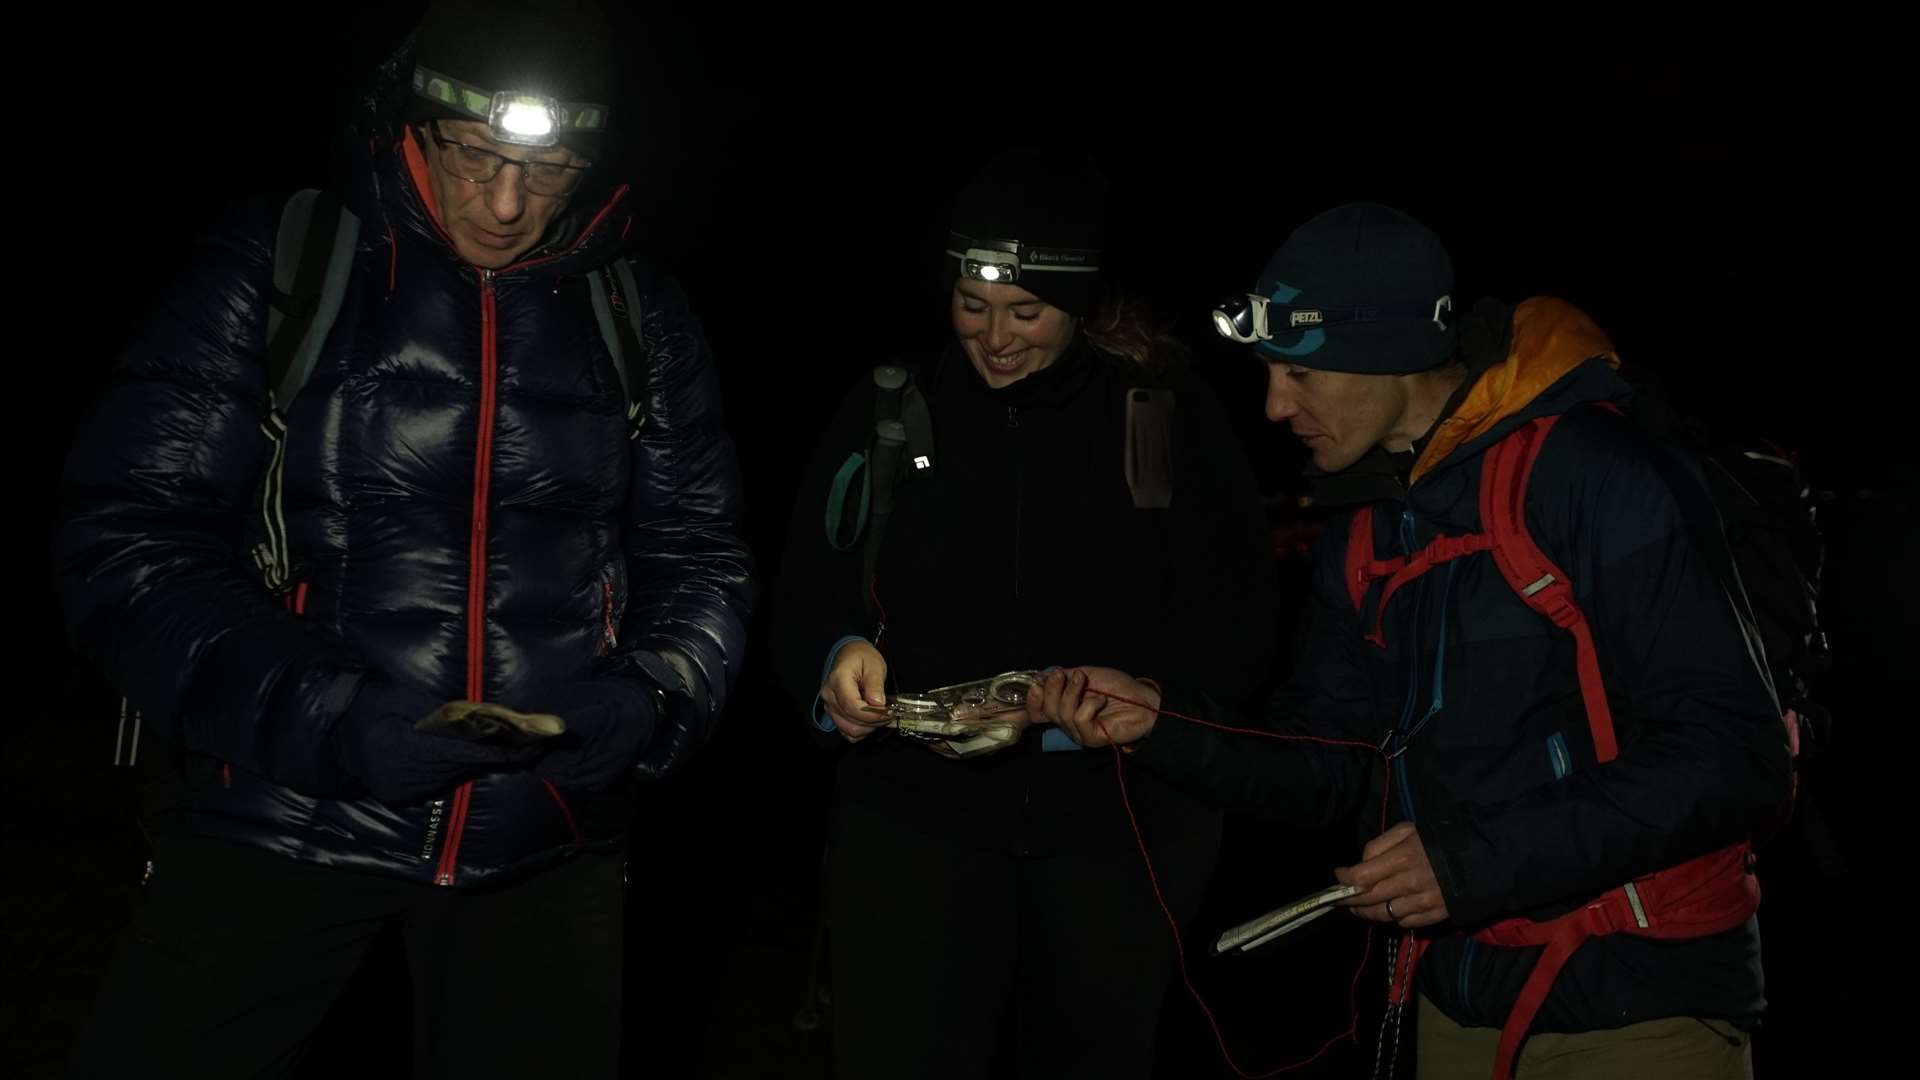 A head torch is essential.